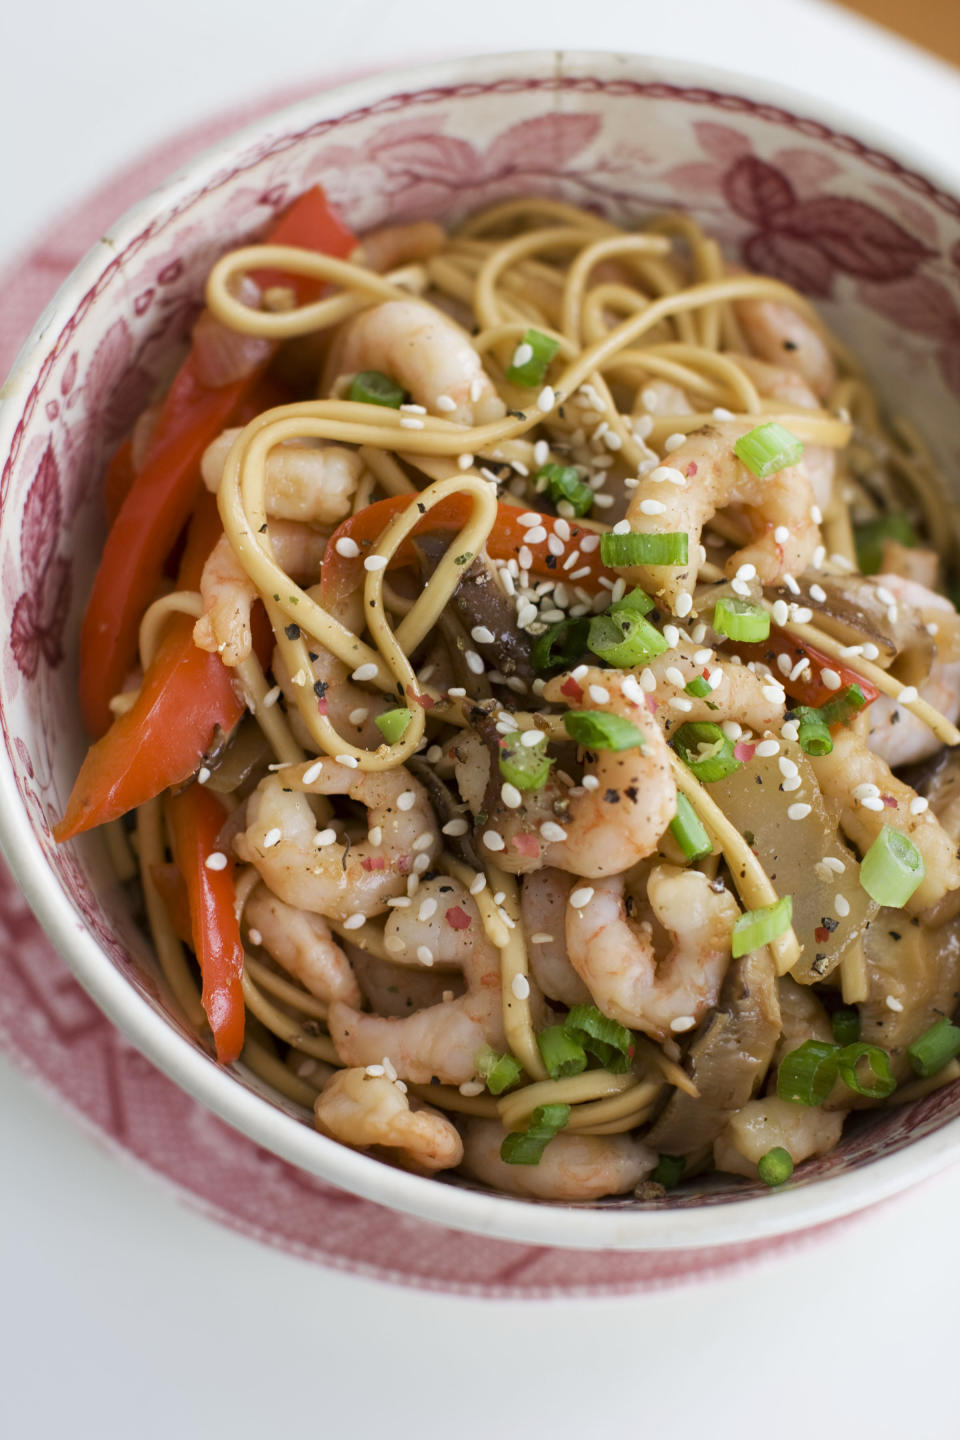 In this image taken on January 14, 2013, shrimp and shitake noodle stir-fry is shown served in a bowl in Concord, N.H. (AP Photo/Matthew Mead)